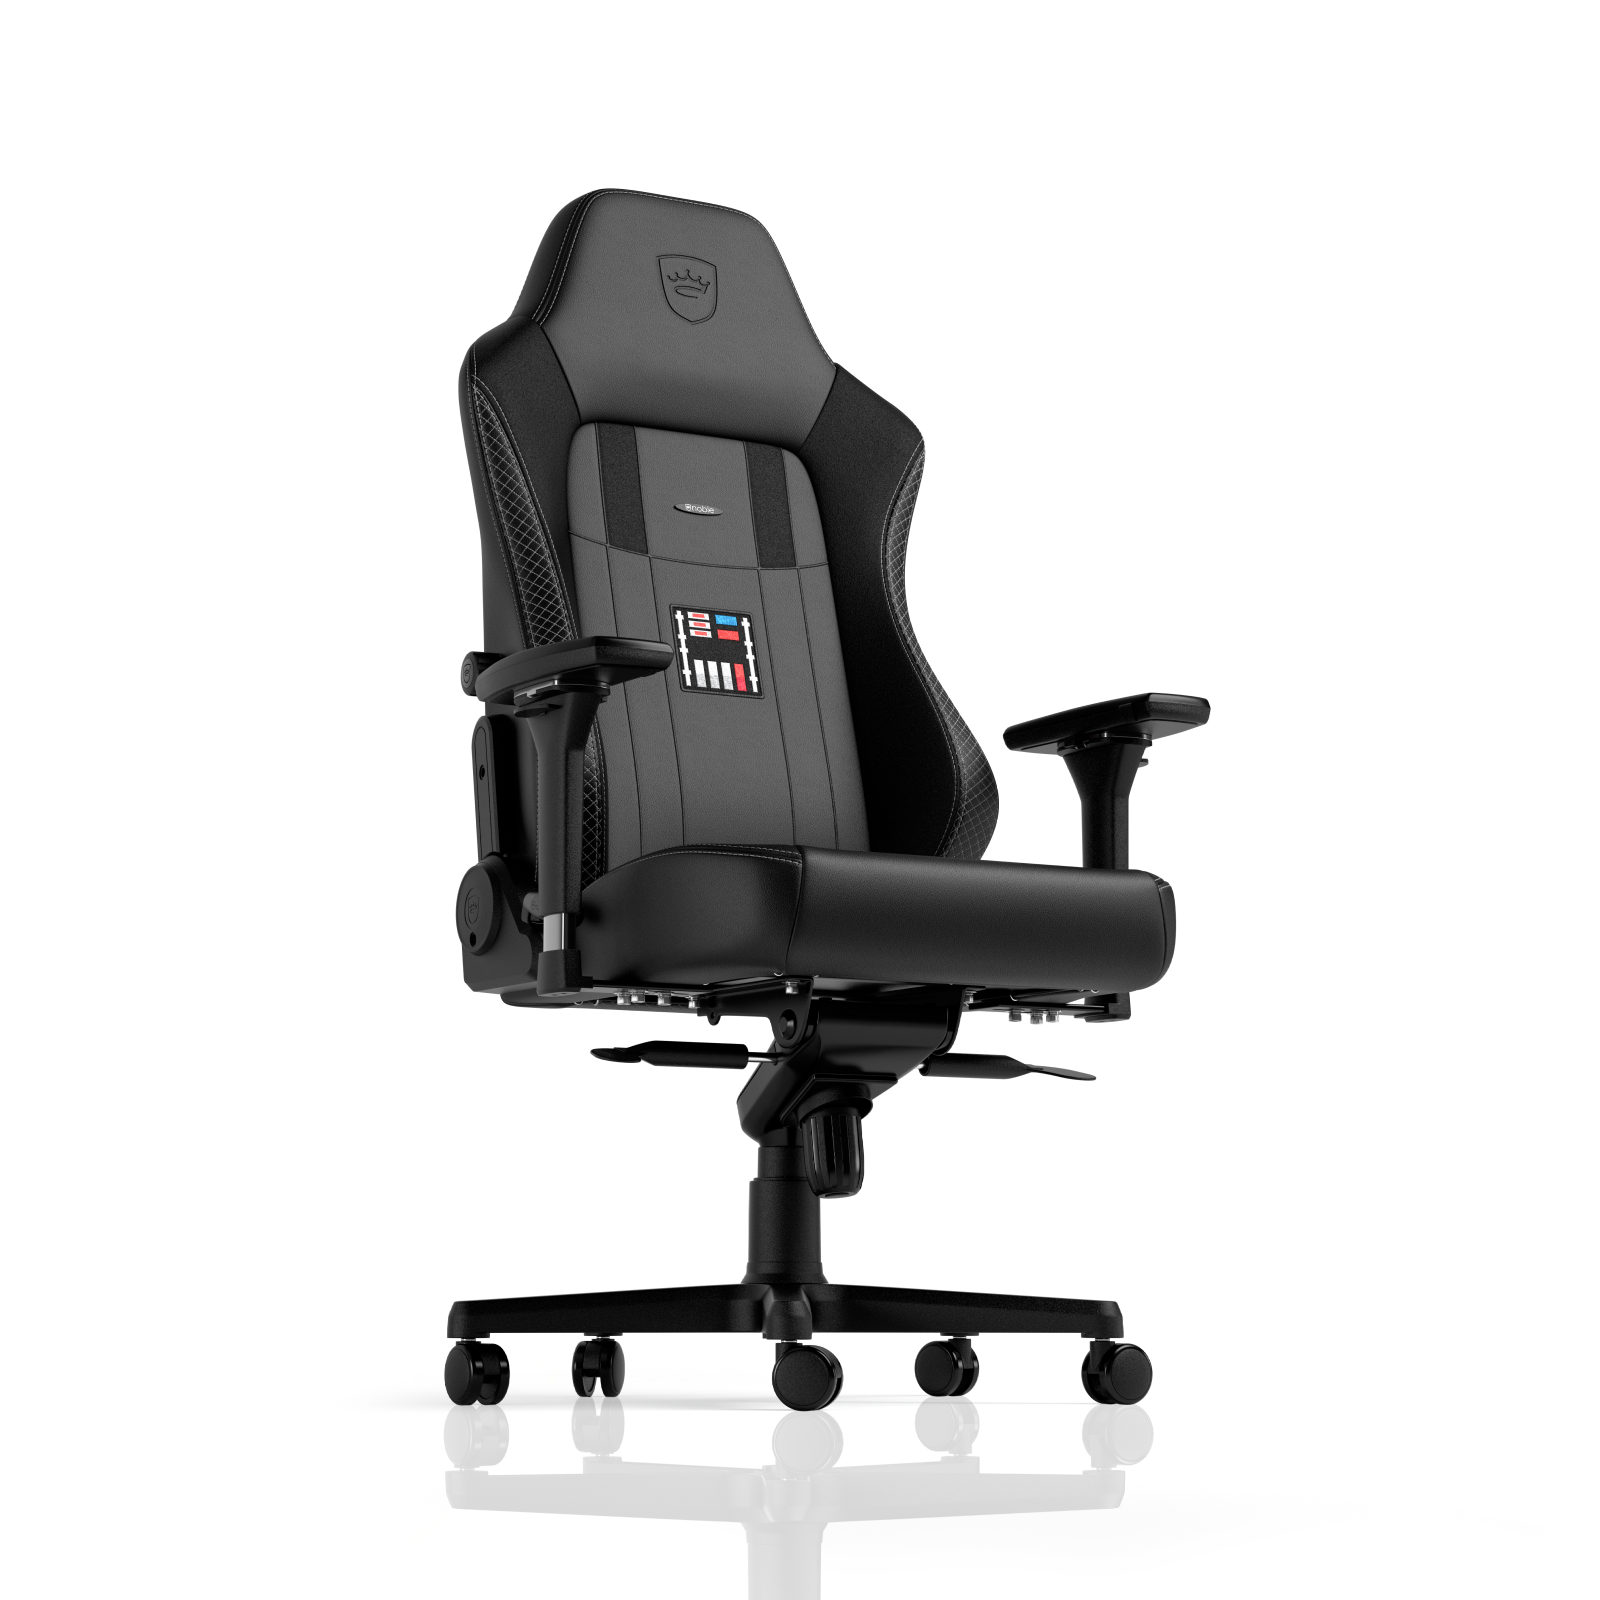 https://img.overclockers.co.uk/content/images/pdp/noblechairs/noblechairs-hero-darth-vader-edition-below-right.png